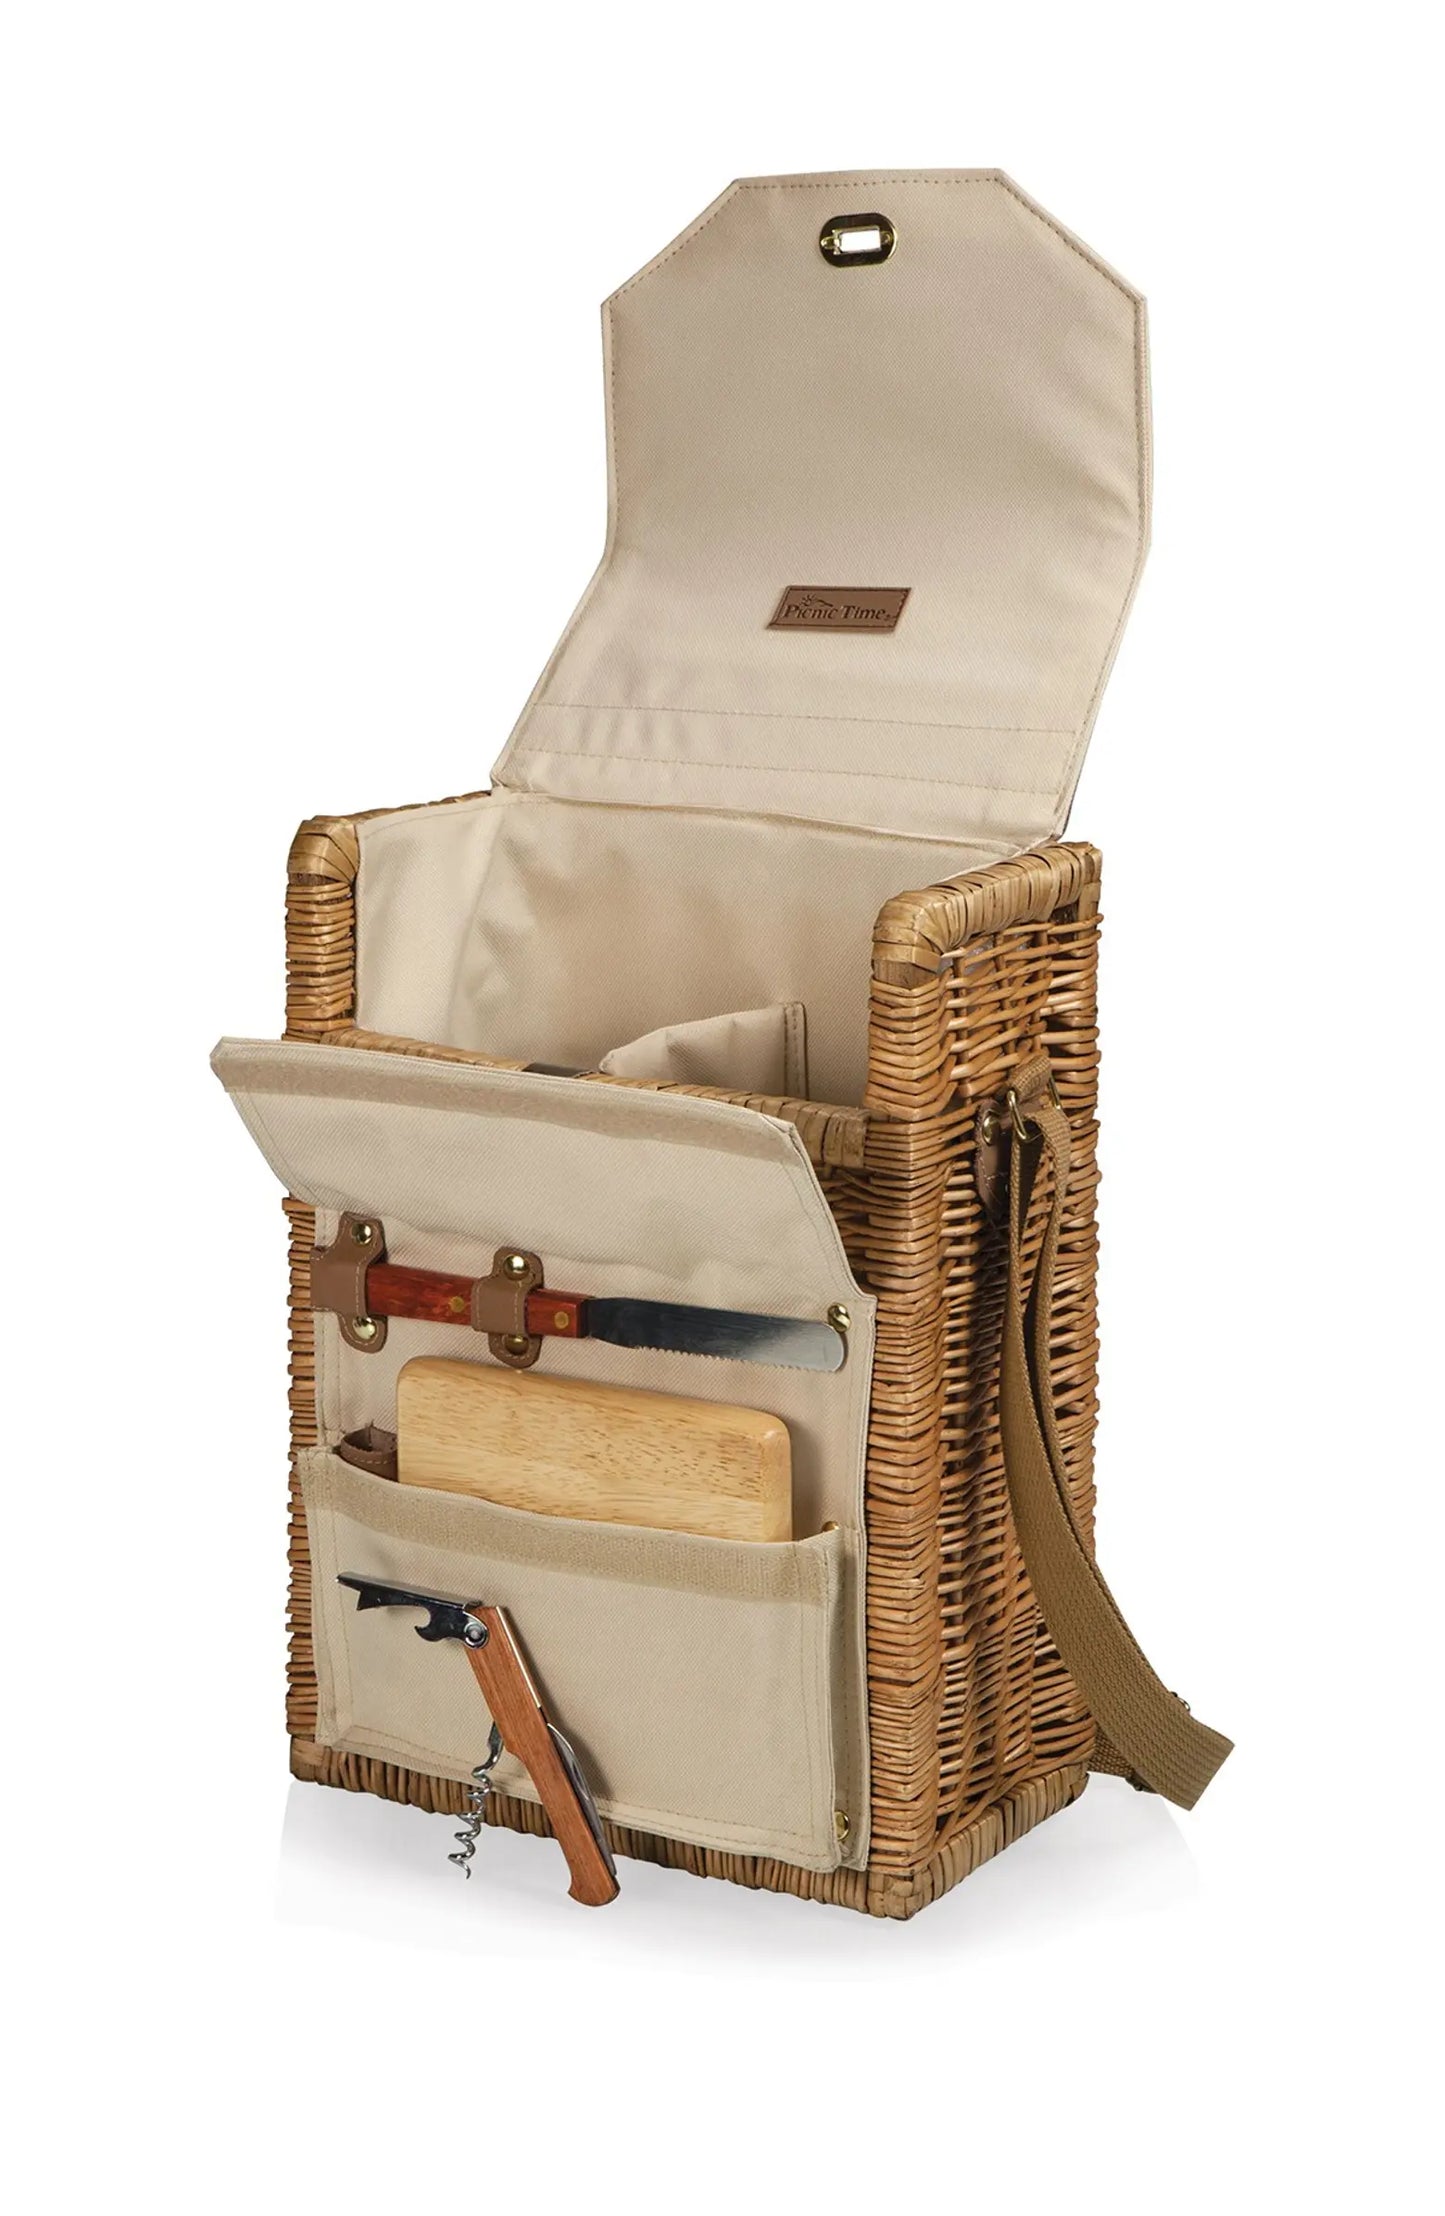 Over the Shoulder Wine & Cheese Picnic Basket